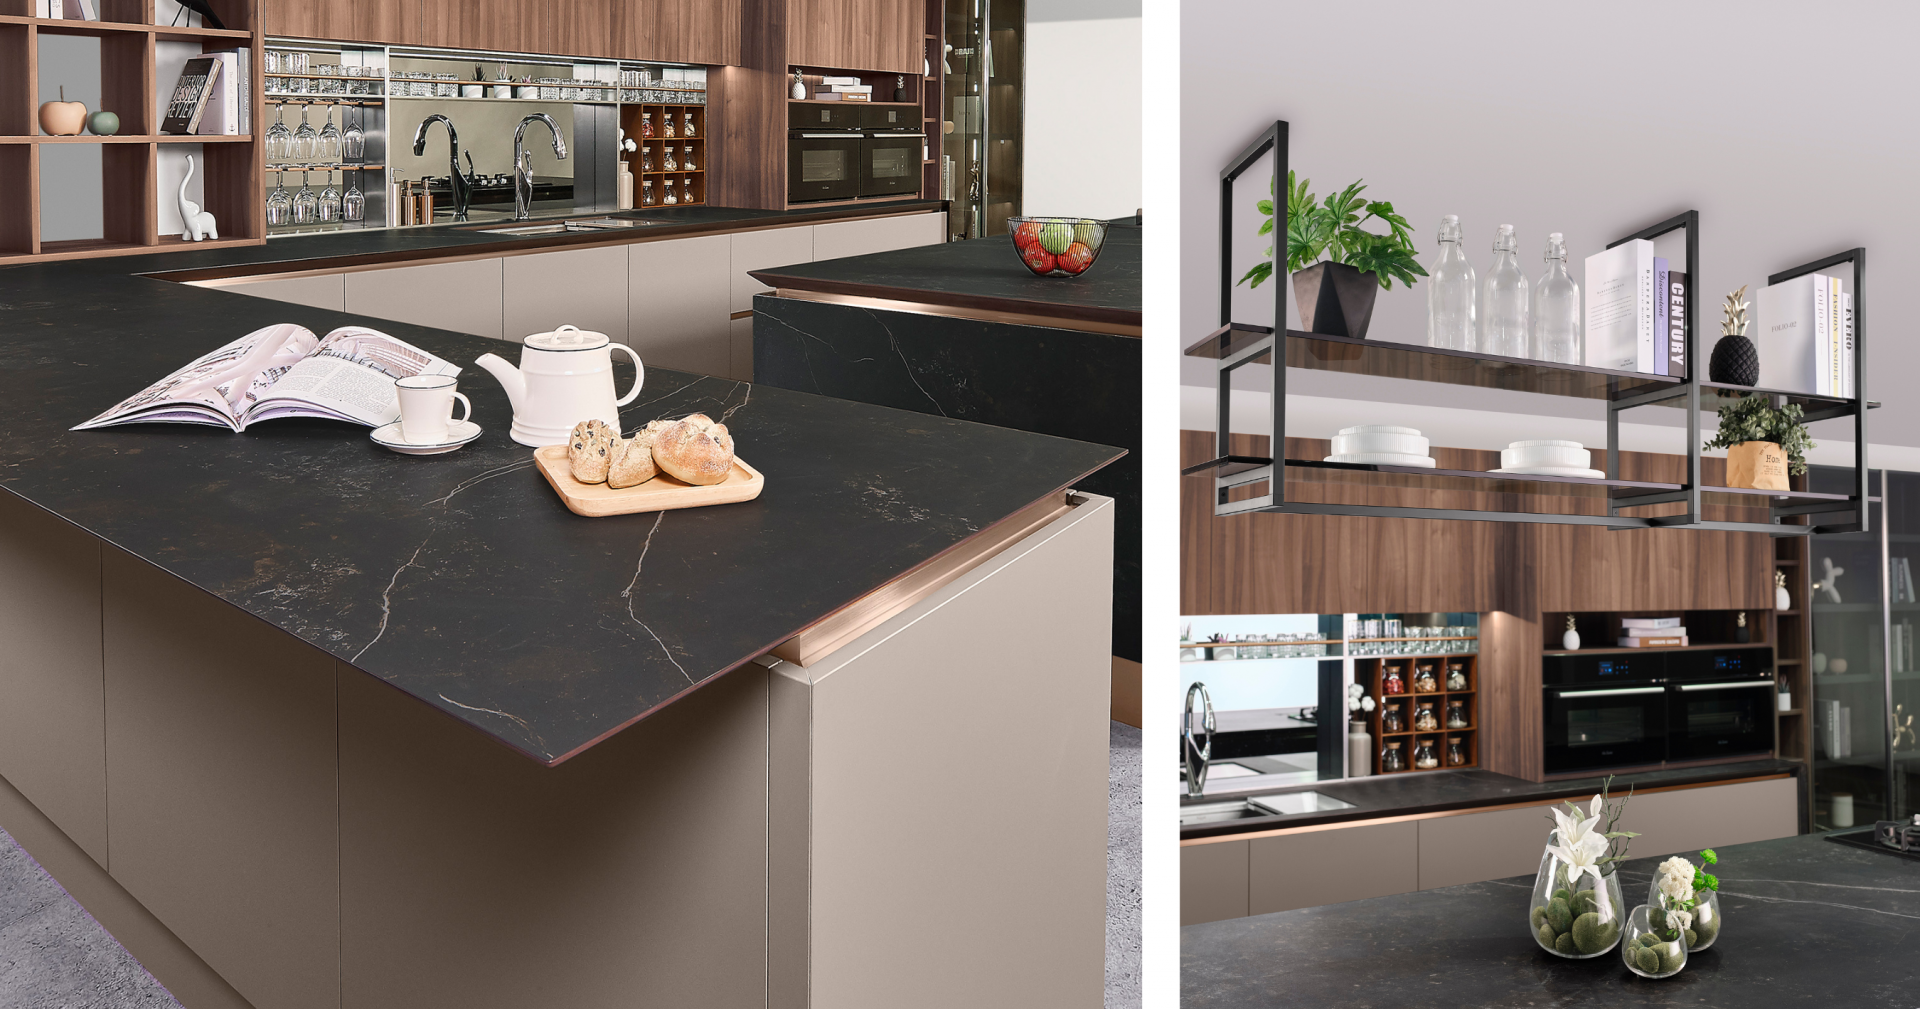 Mia Cucina uses quality materials and cooking appliances to customise your dream kitchen